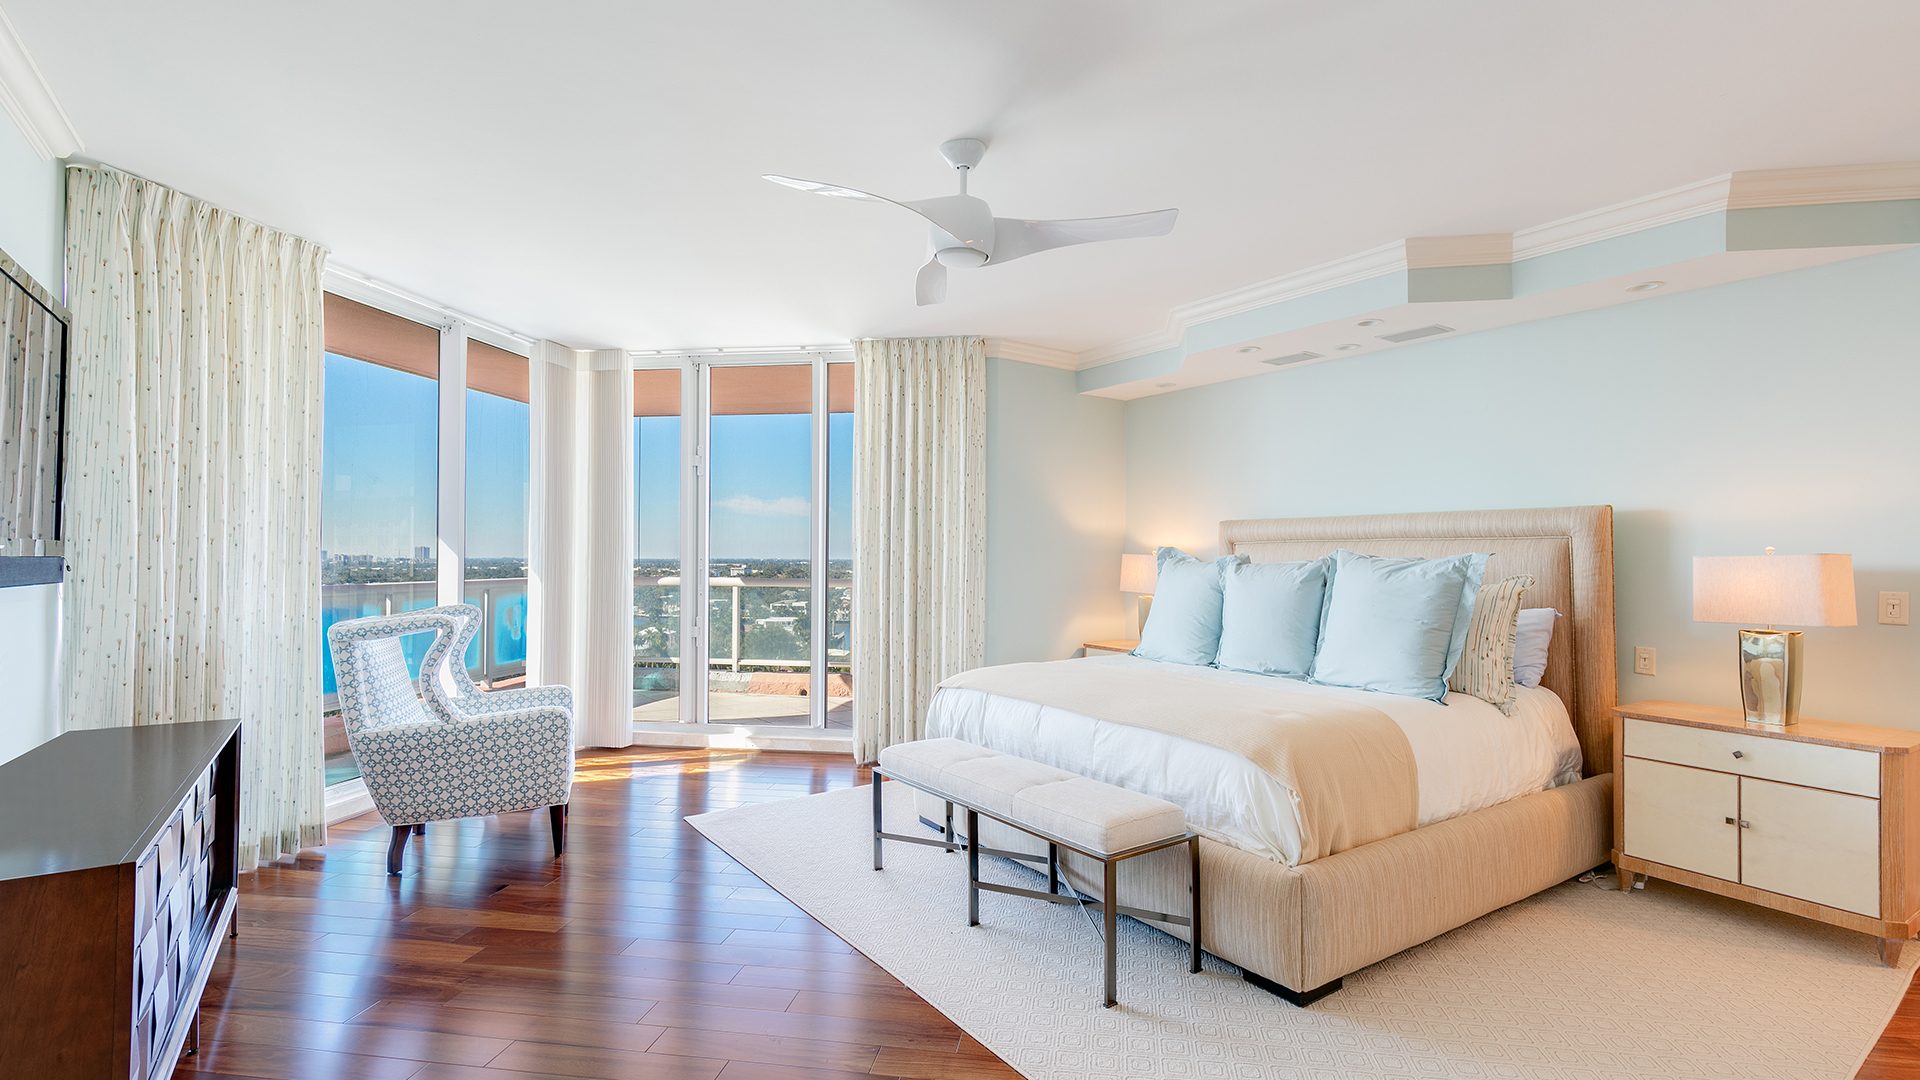 Residence 14E, Tower I at The Palms, Luxury Oceanfront Condominiums in Fort Lauderdale, Florida 33305.